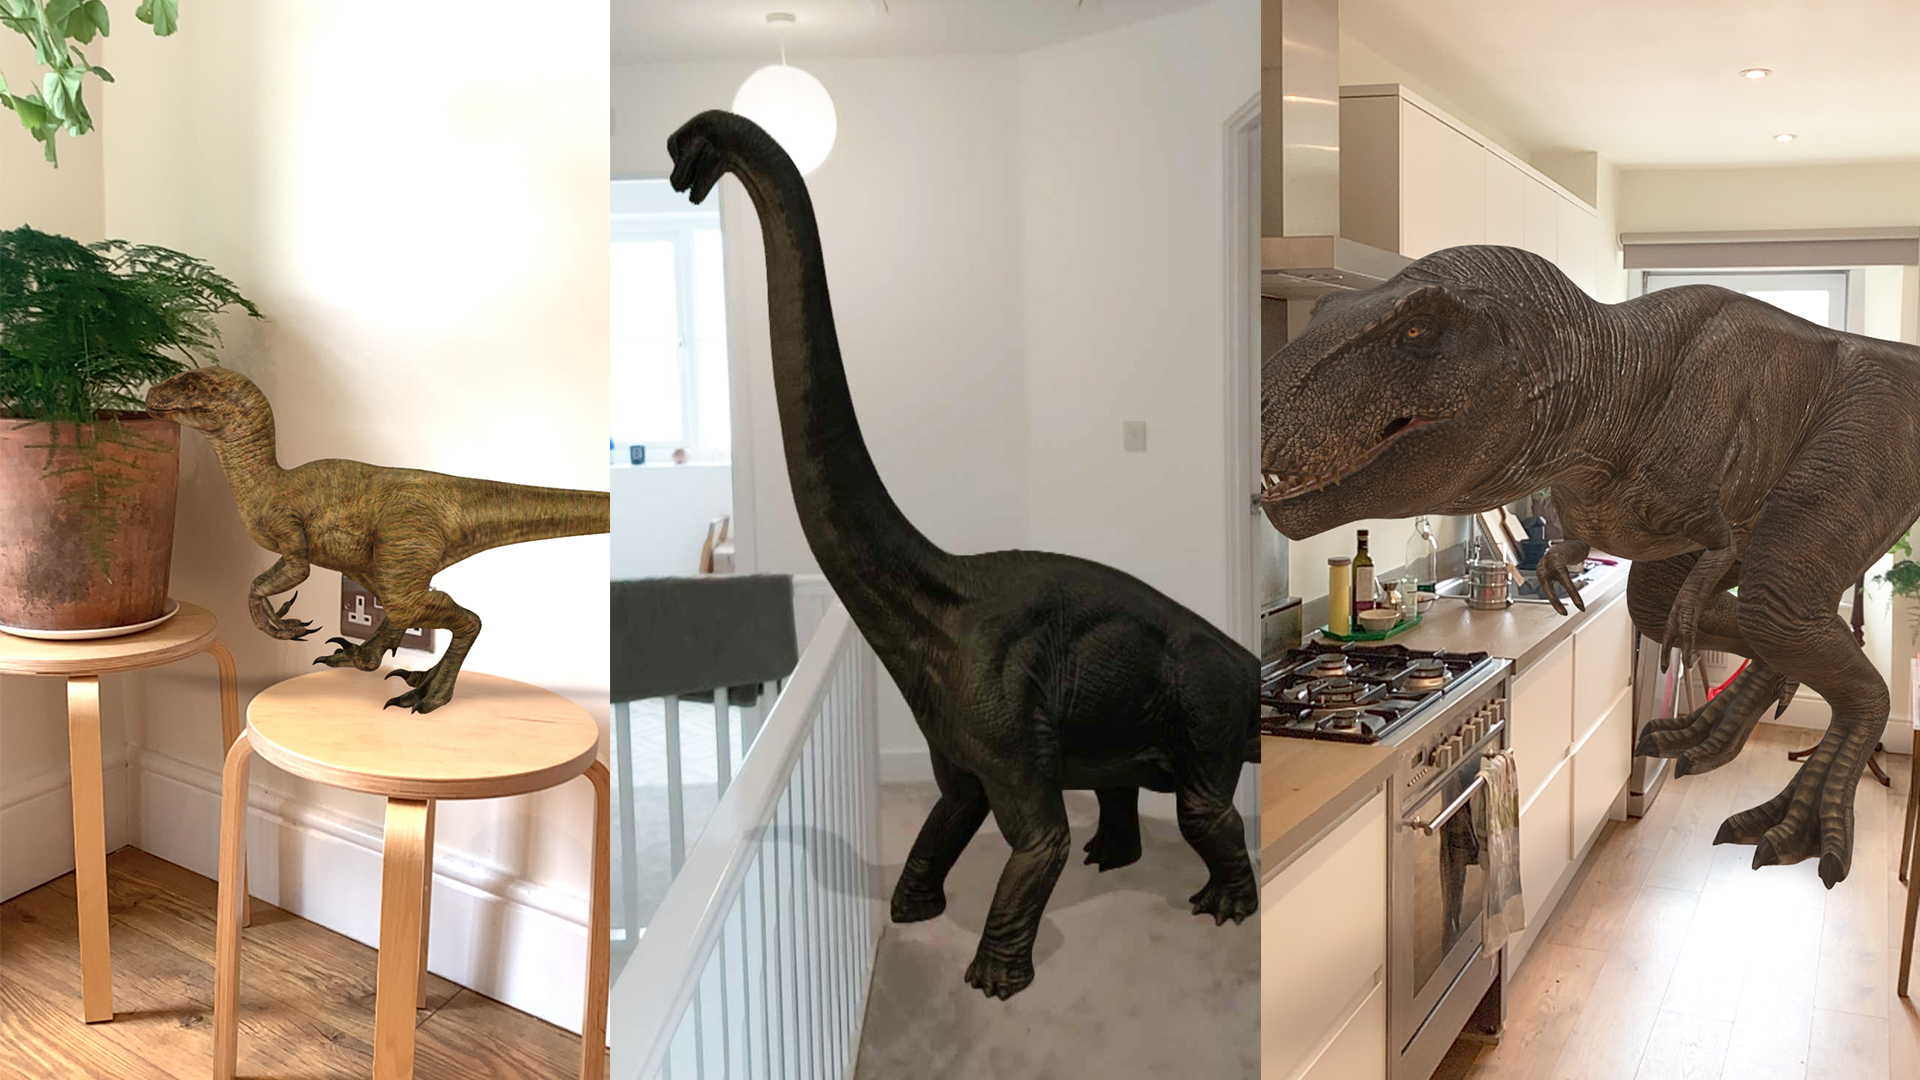 Google's AR dinosaurs are ridiculously cool | Creative Bloq